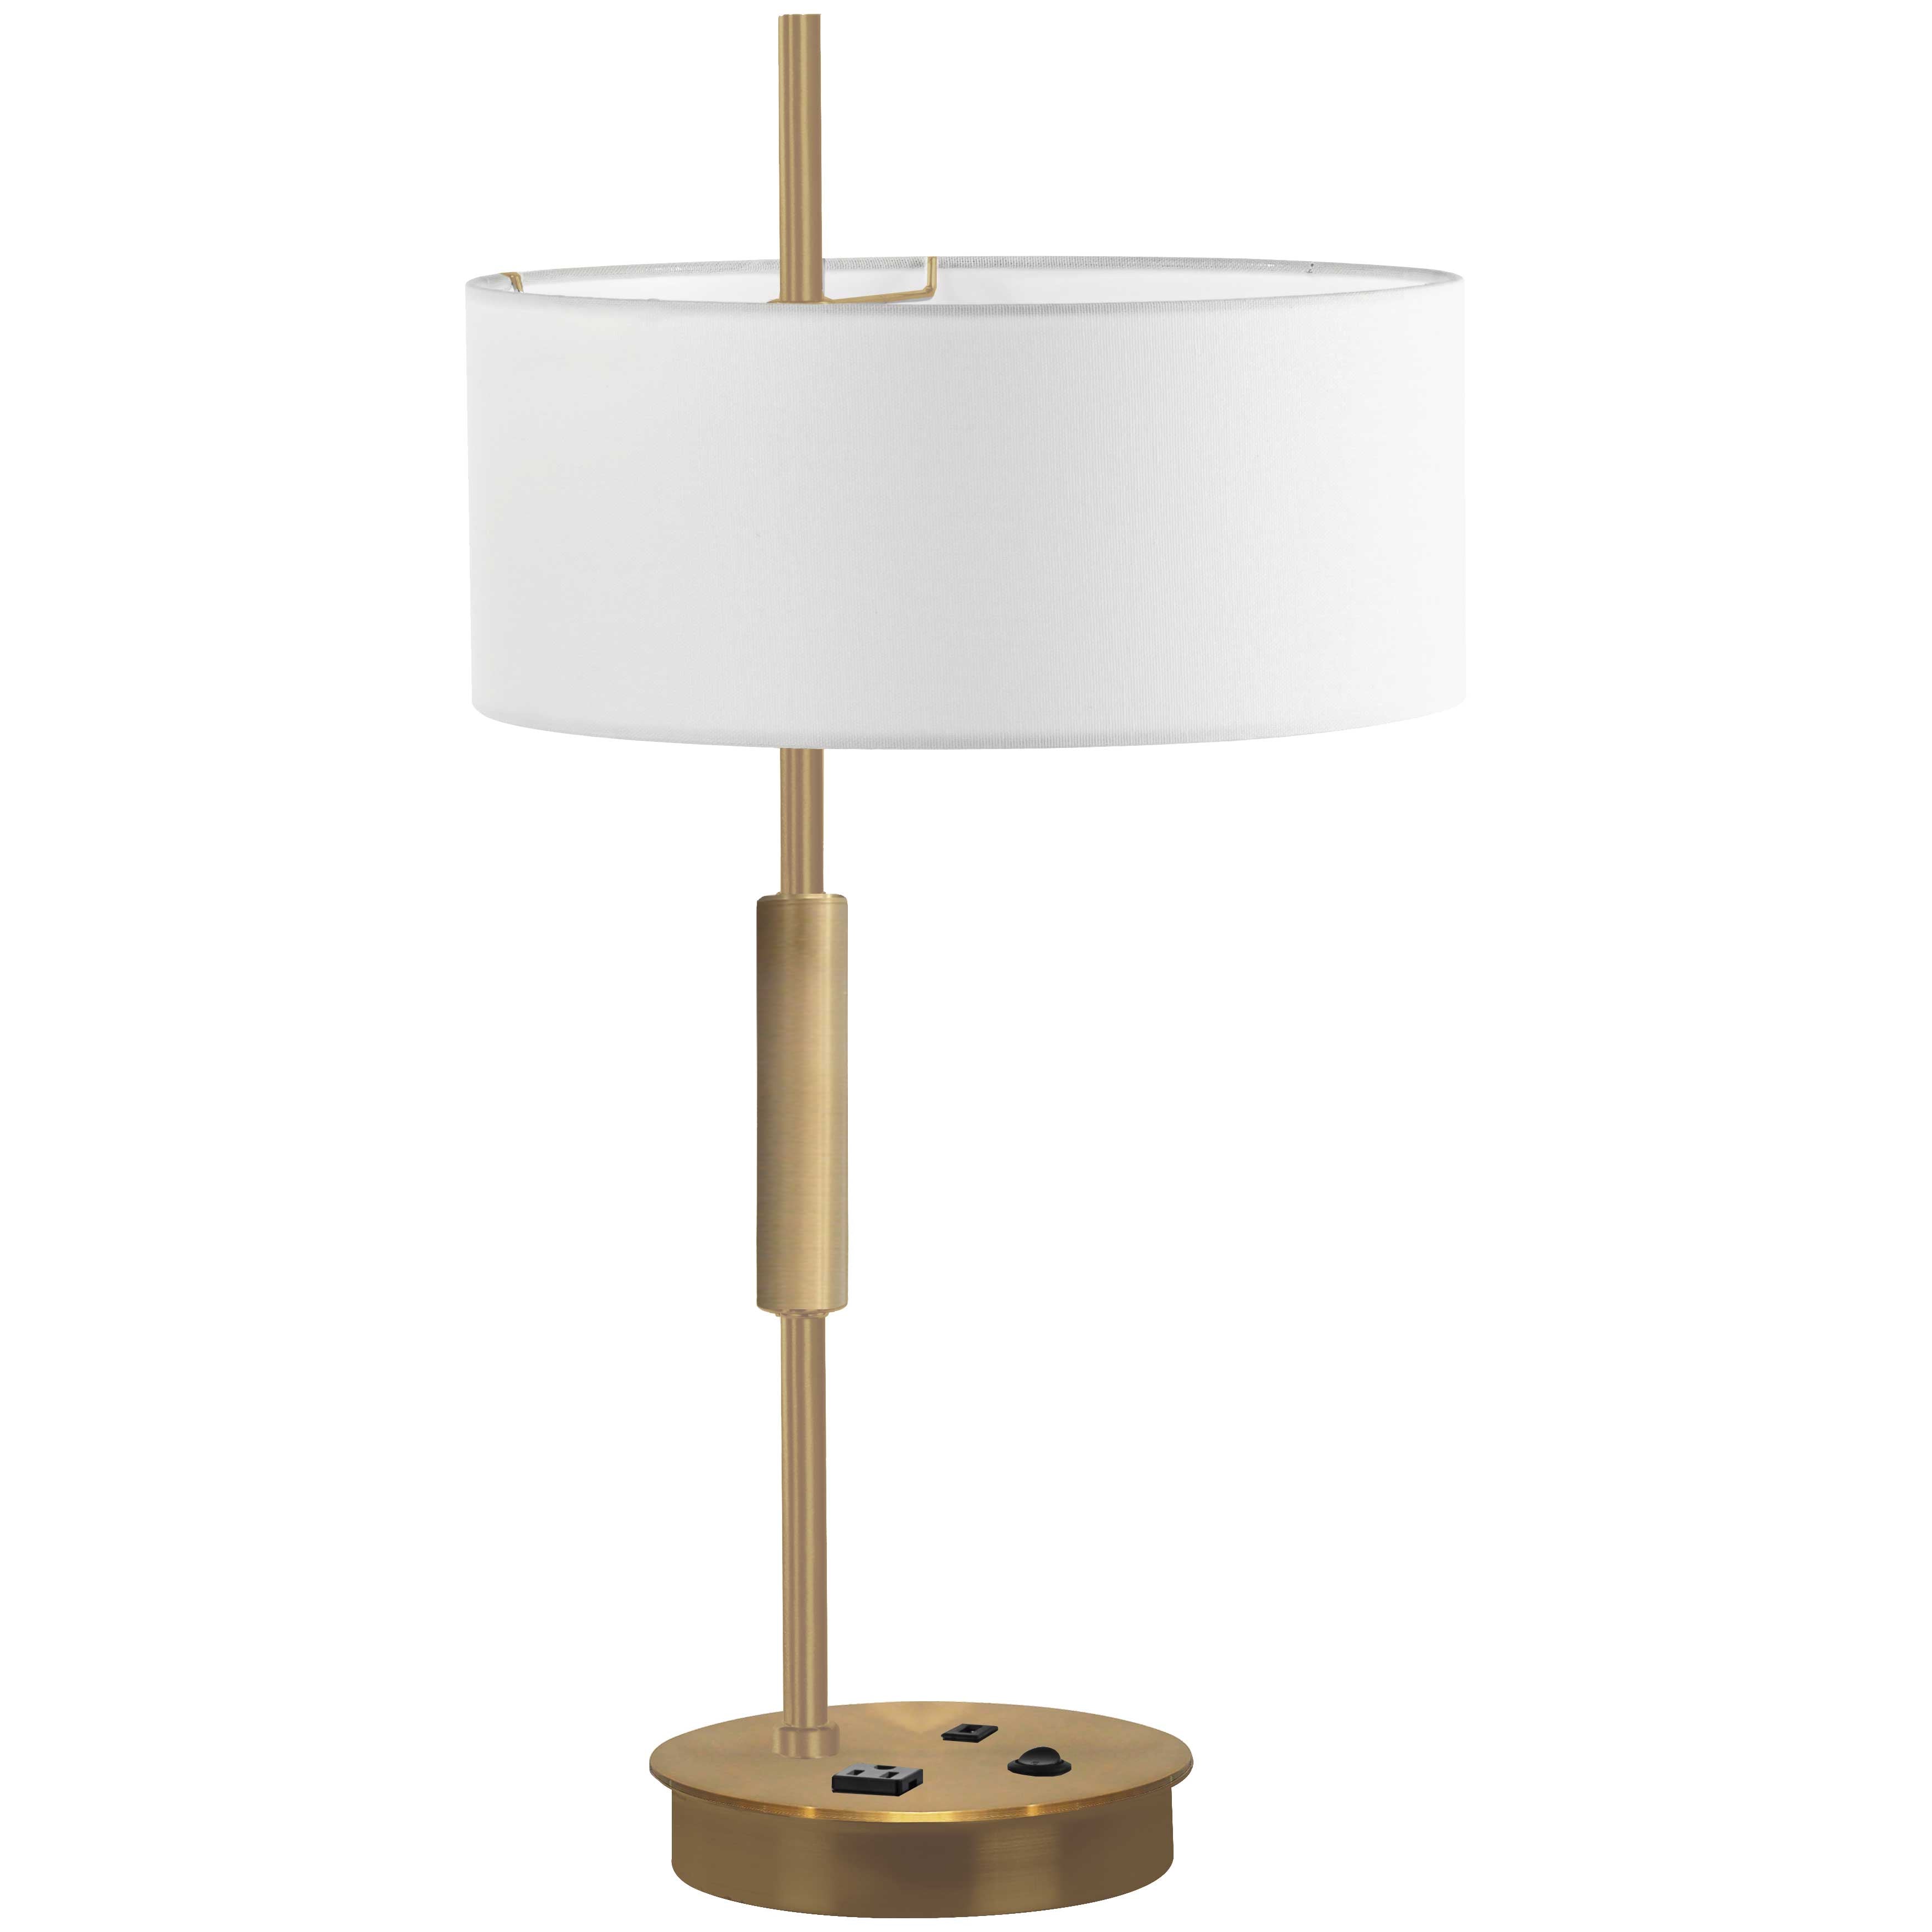 FITZGERALD Table lamp Gold - FTG-261T-AGB-WH | DAINOLITE